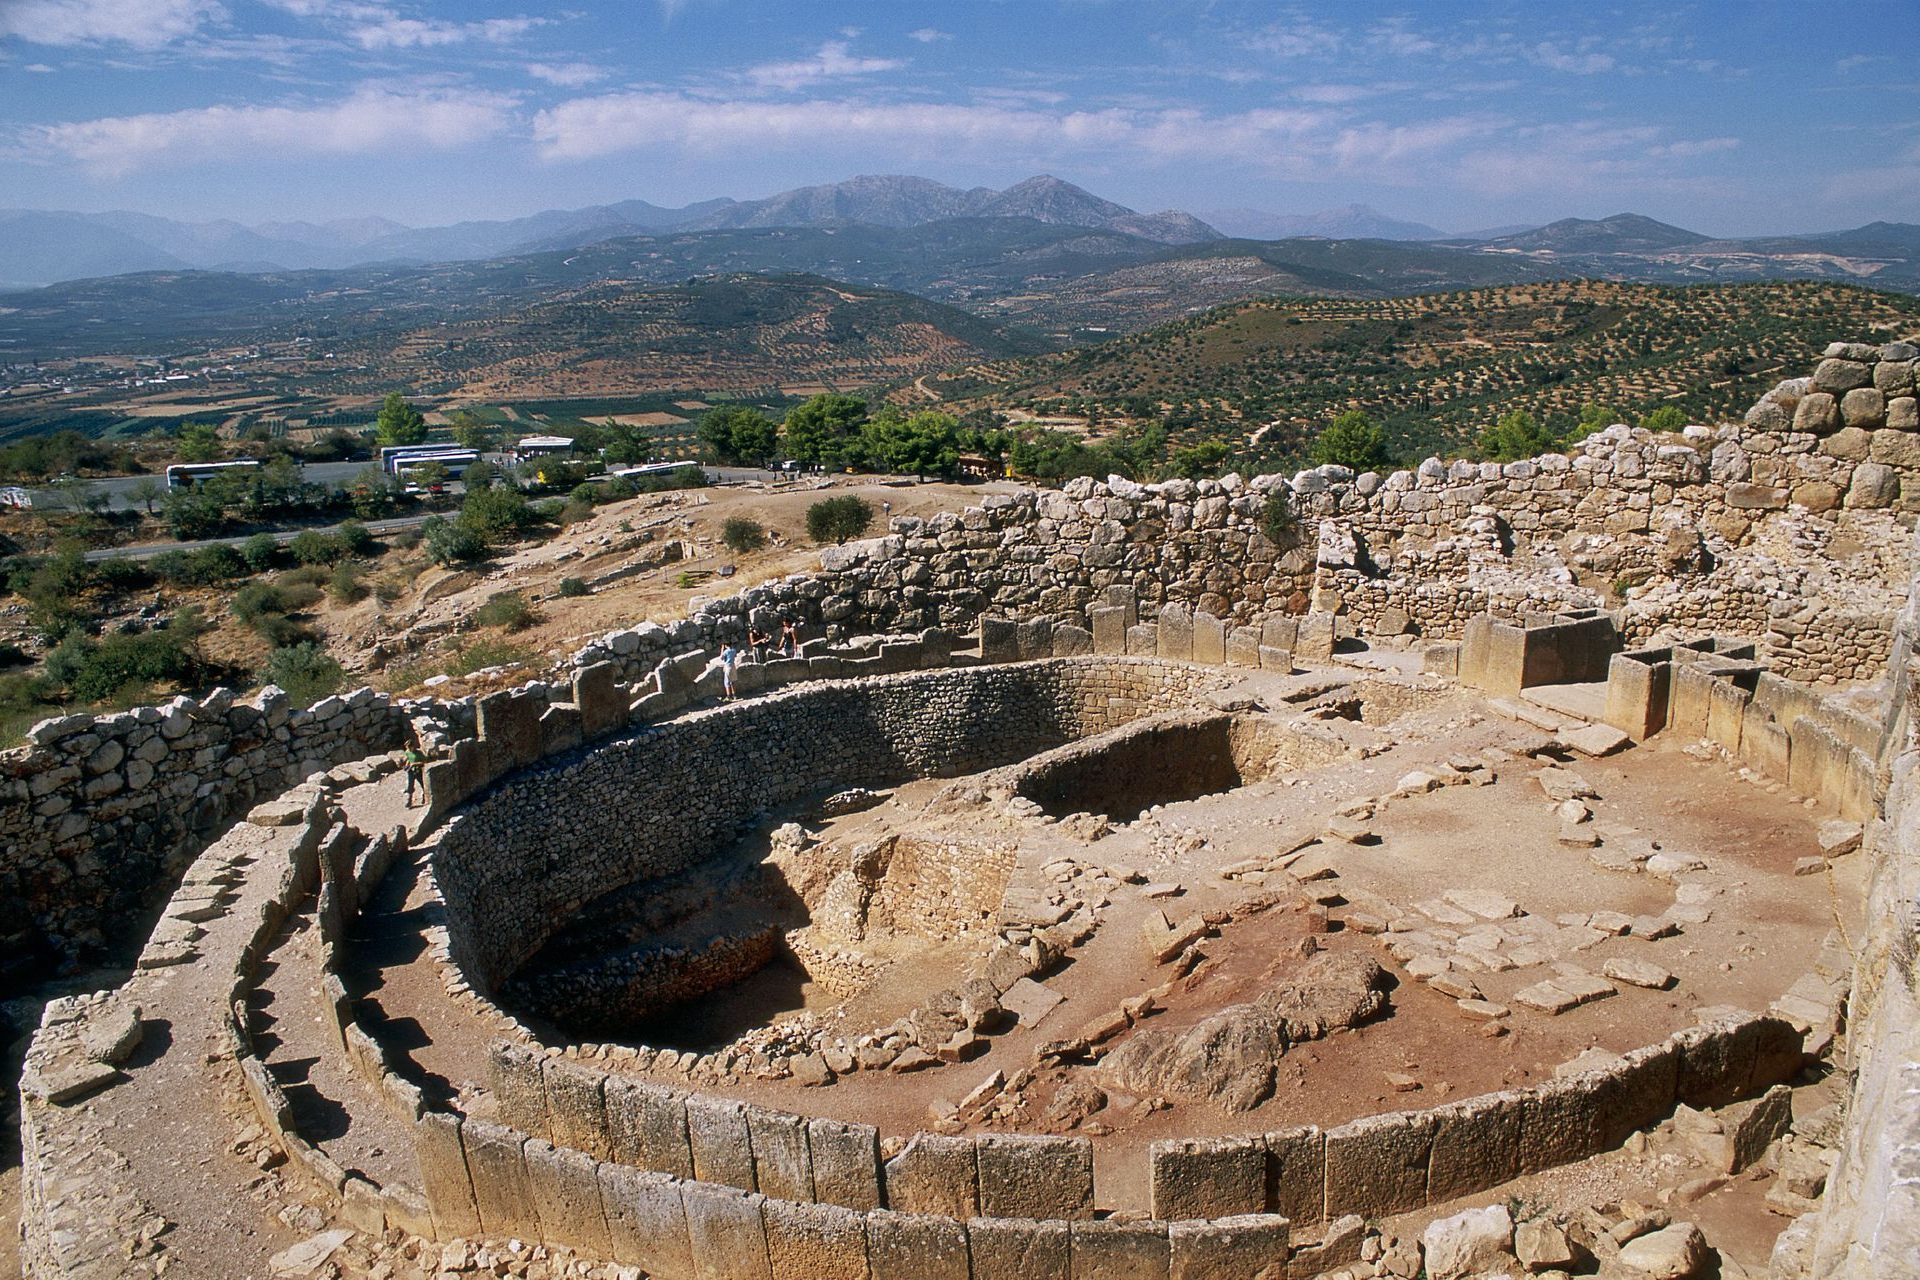 <p>In the same region of southern Greece, Mycenae was the city of Agamemnon, the hero of the Trojan War. Many remnants of the Mycenaean civilization remain, such as the famous Lioness Gate, the ruins of the ancient fortress, and a series of royal tombs. Not to be missed for fans of Greek Antiquity!</p>